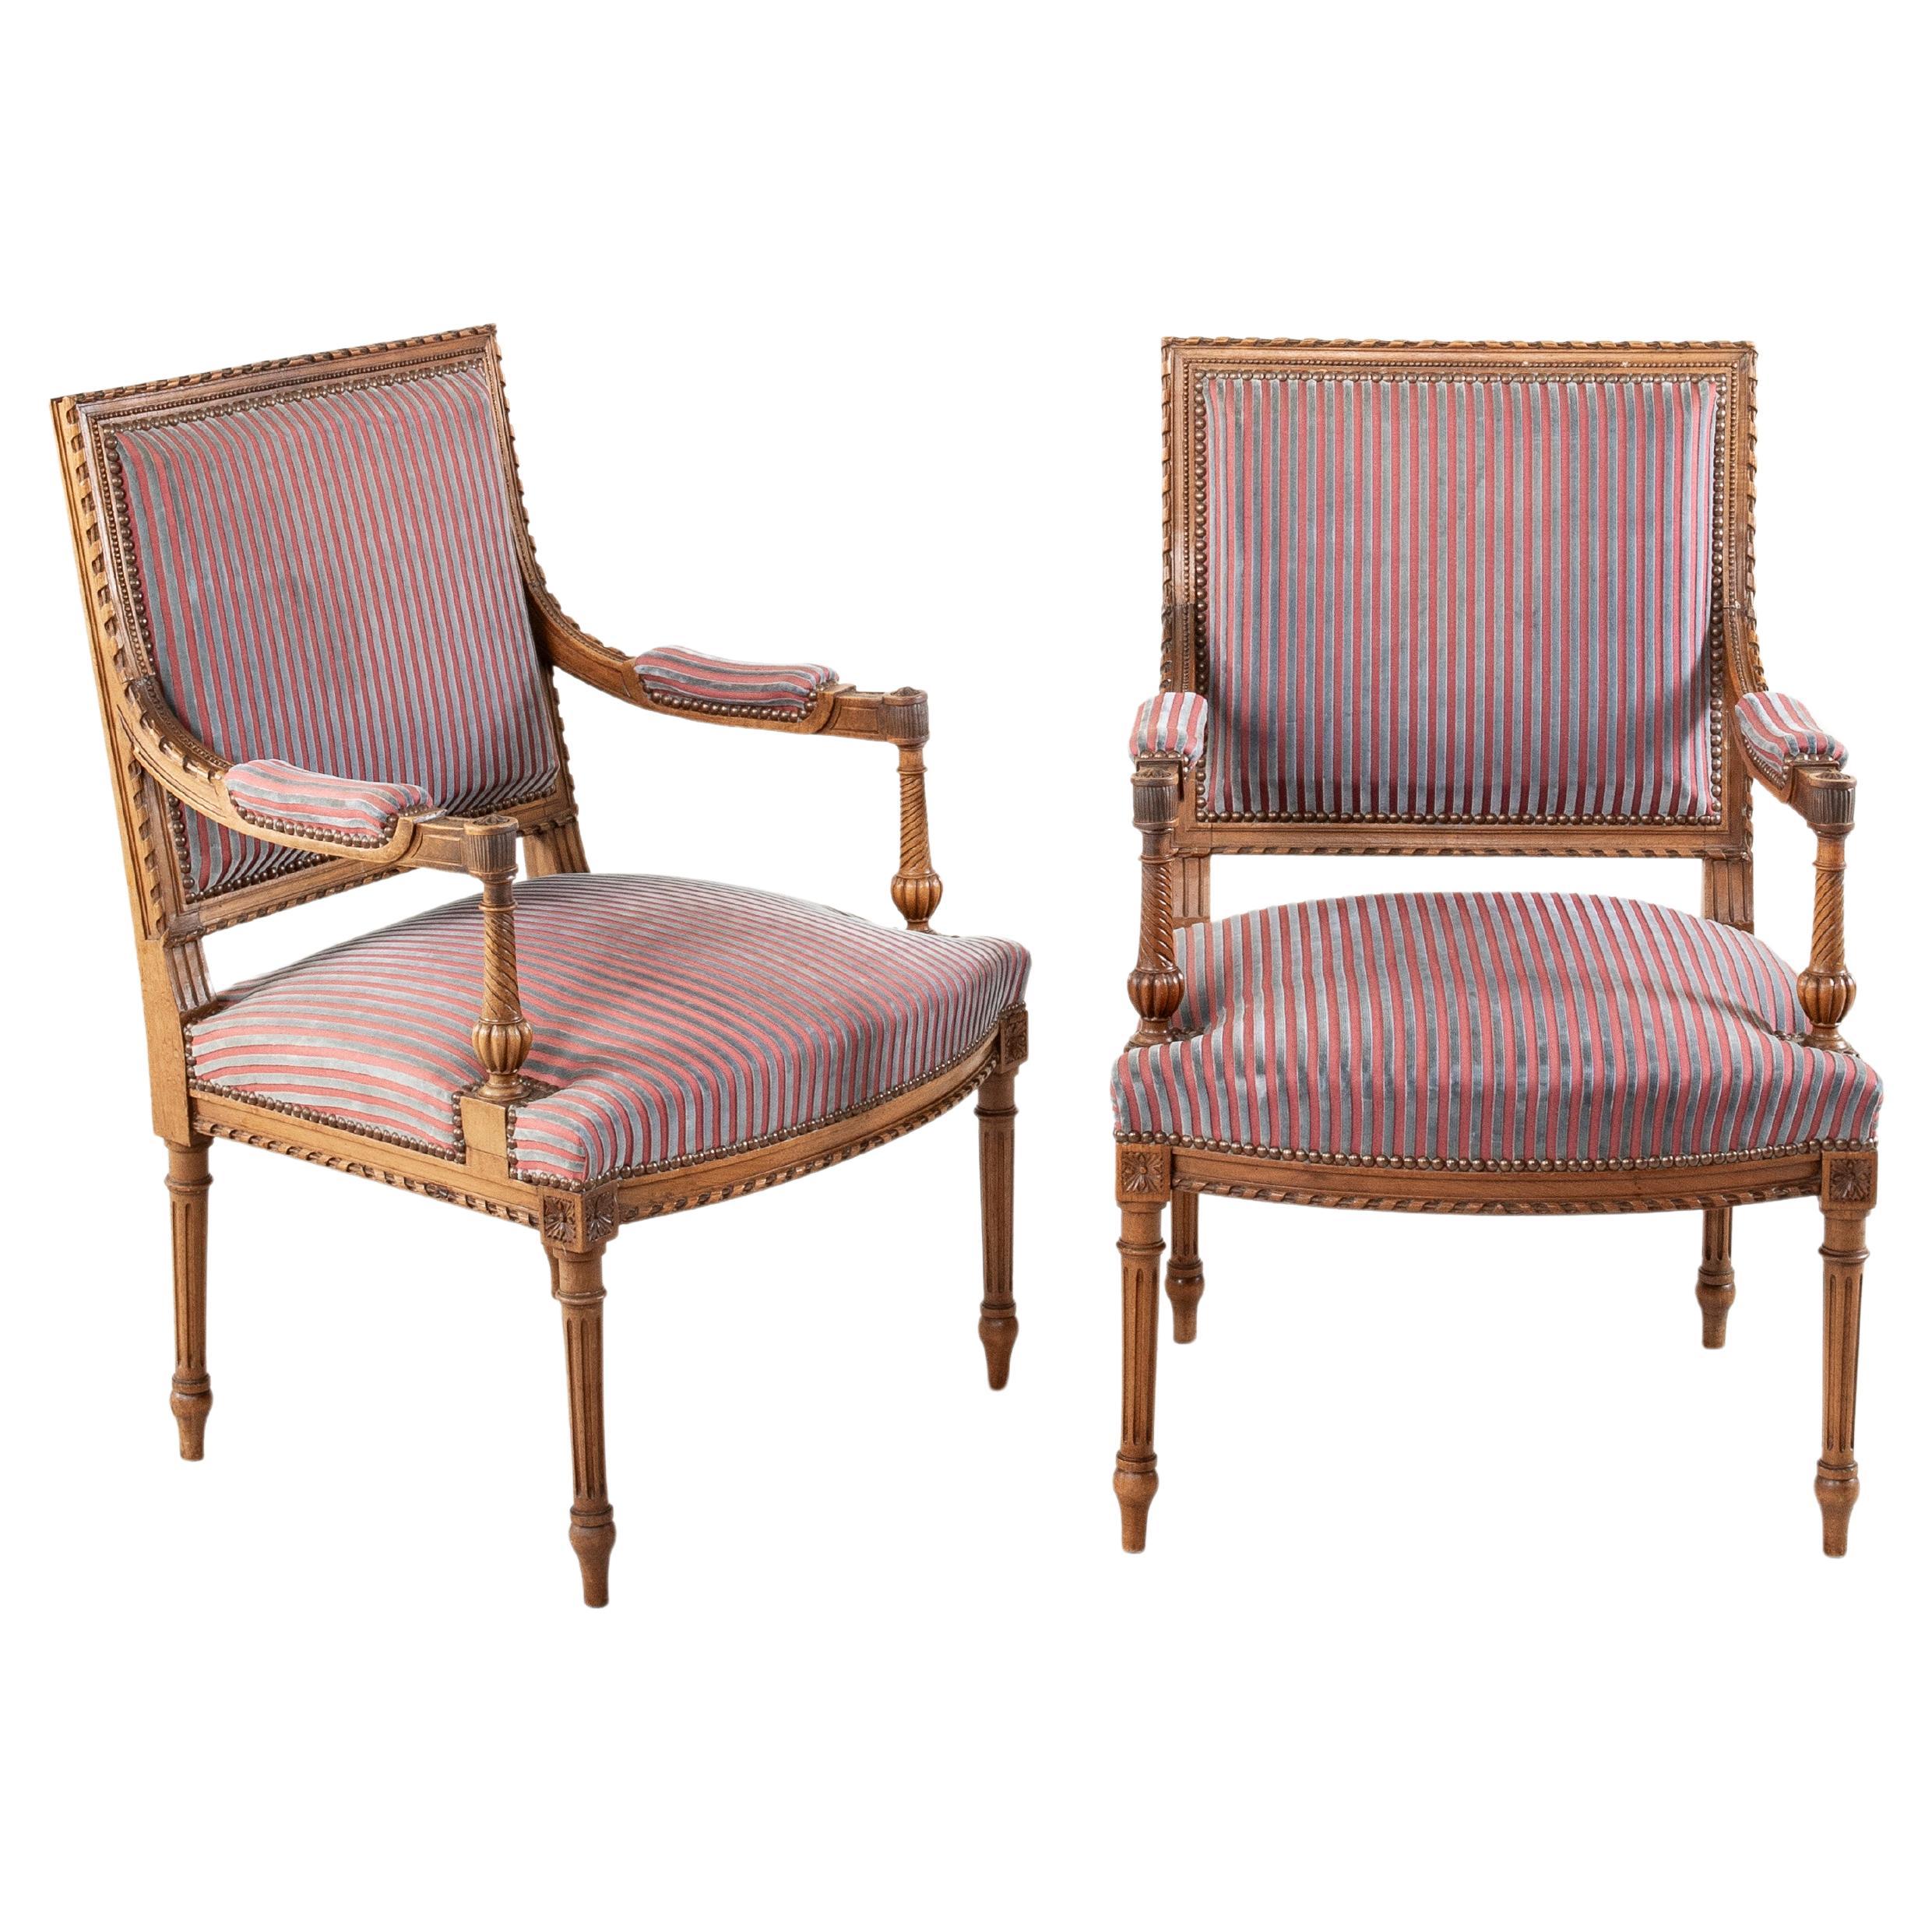 Pair of Late 19th Century French Louis XVI Style Hand Carved Walnut Armchairs For Sale